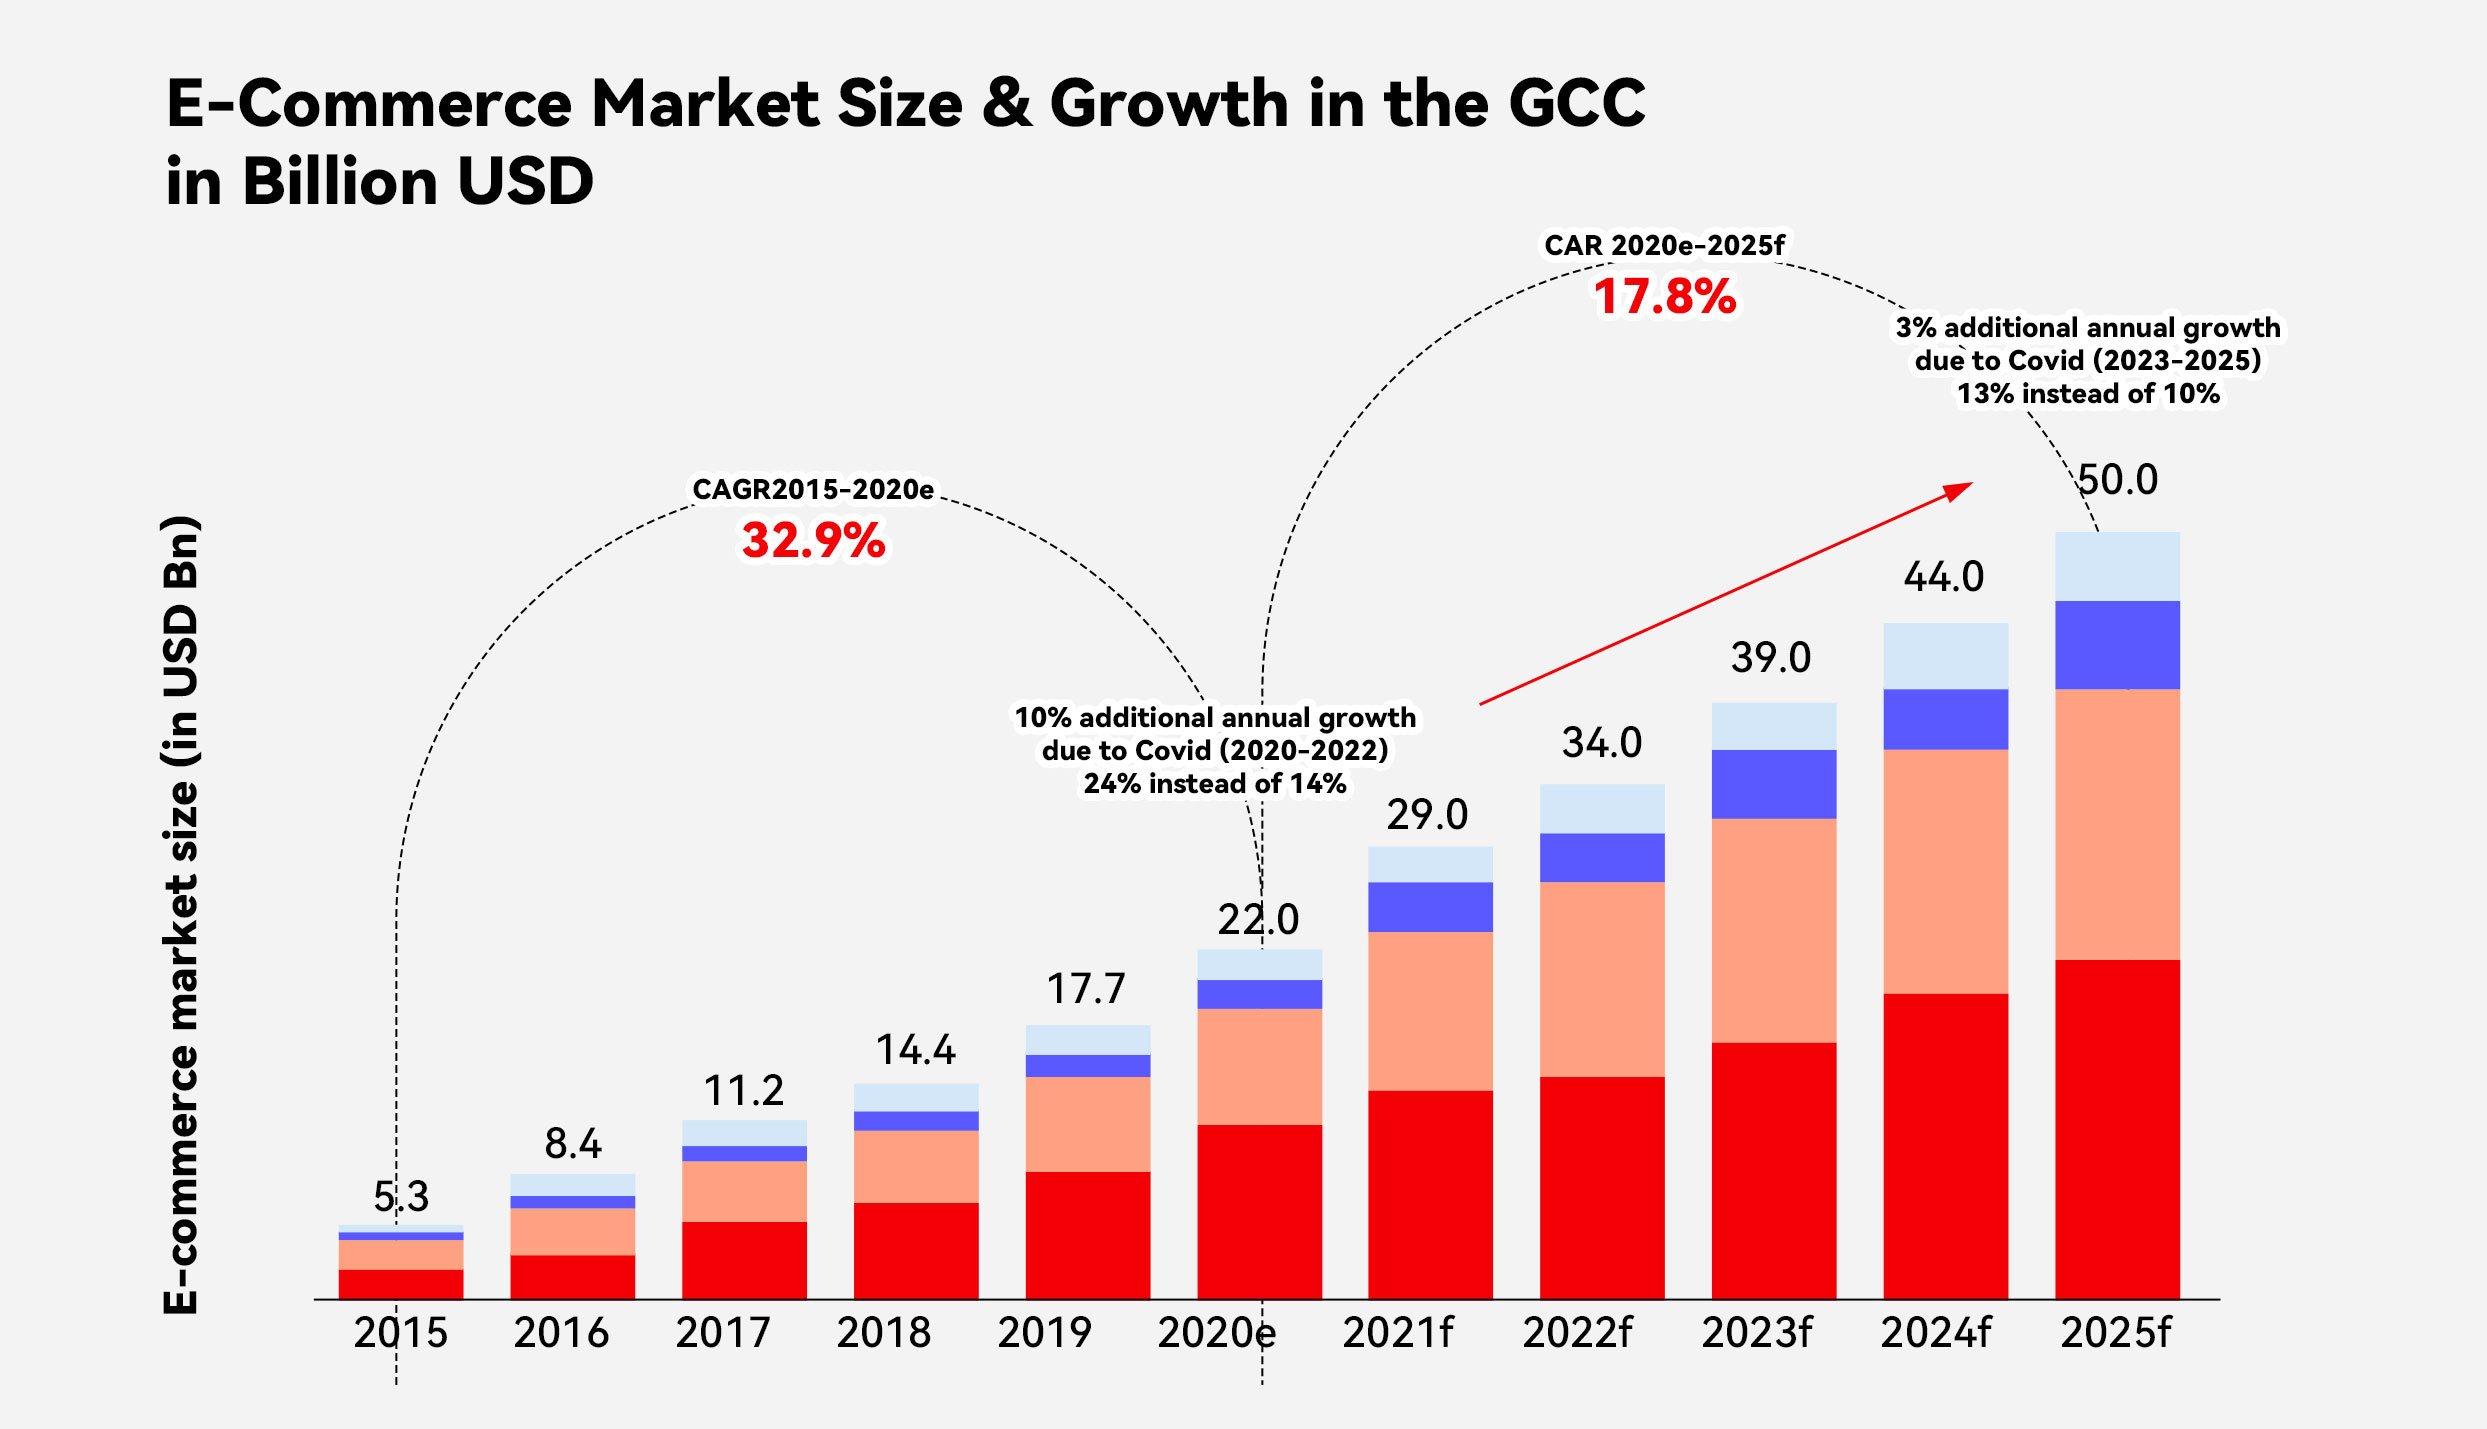 Graphic titled "Ecommerce market size and growth in the GCC in Billion USD" indicates that the market is expected to grow to 50 billion USD by 2025.